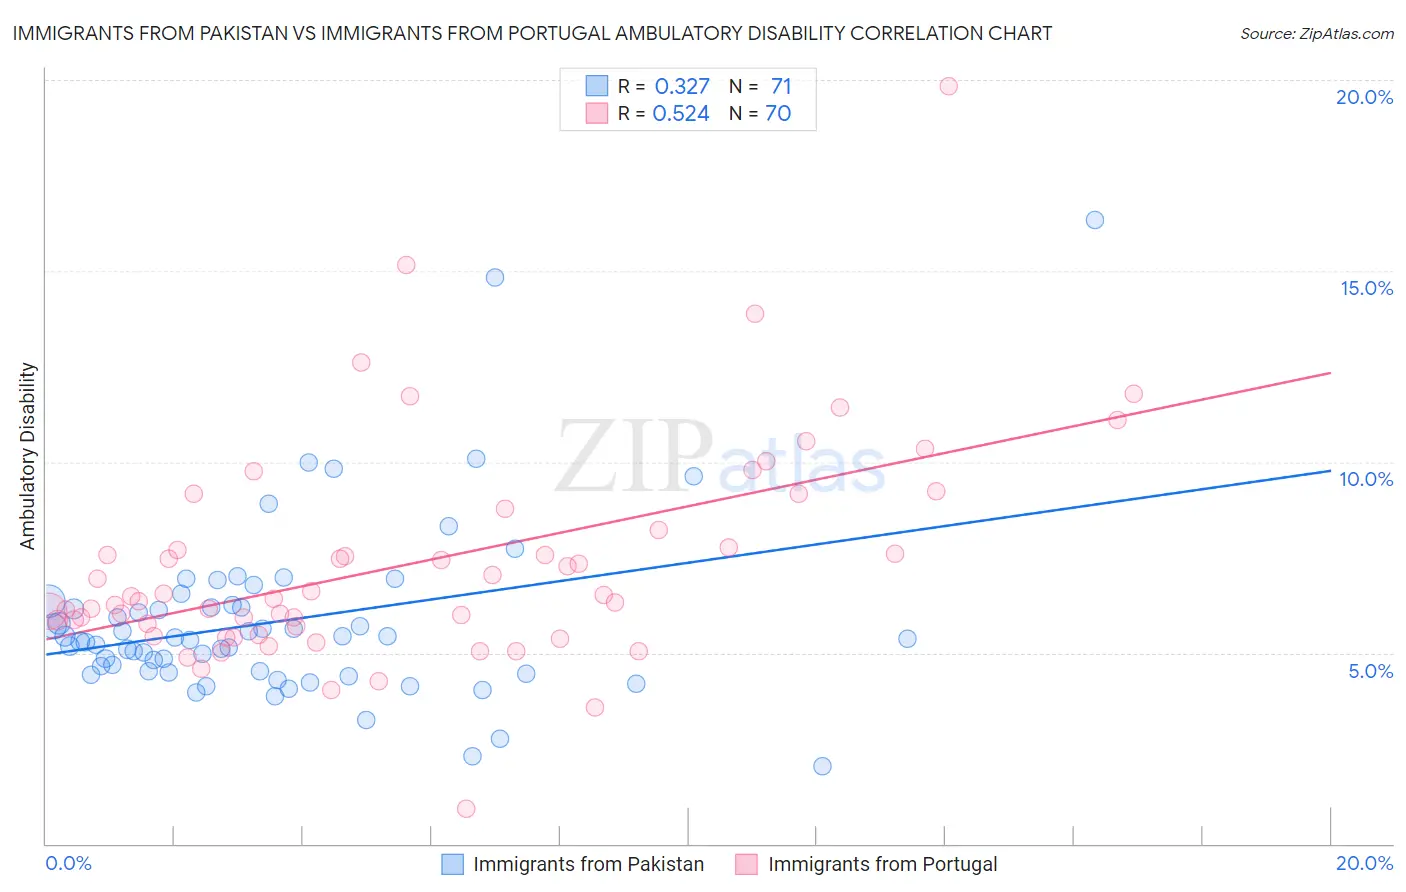 Immigrants from Pakistan vs Immigrants from Portugal Ambulatory Disability